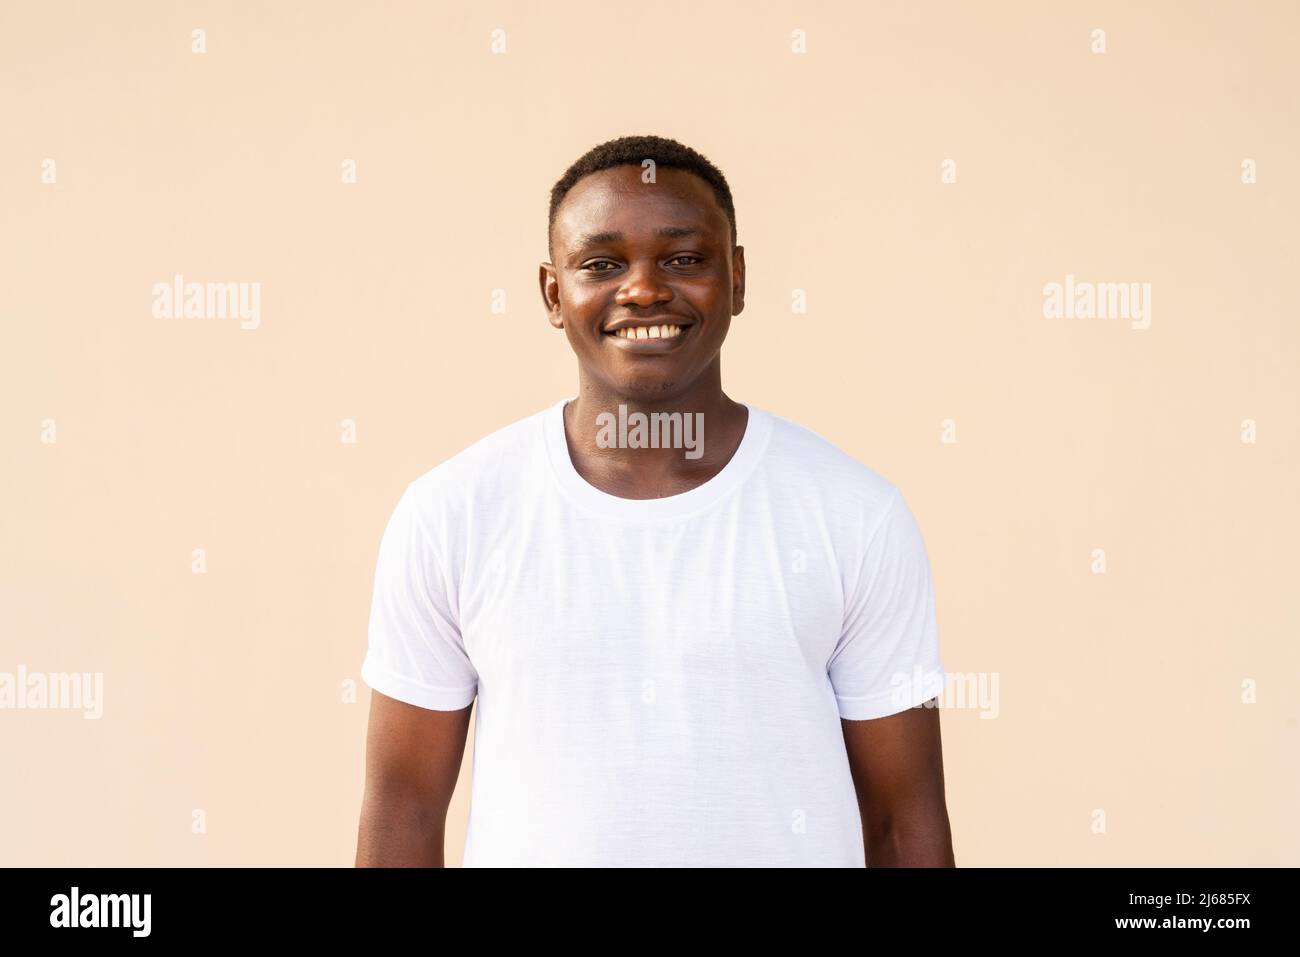 Portrait of handsome young African man wearing t-shirt Stock Photo